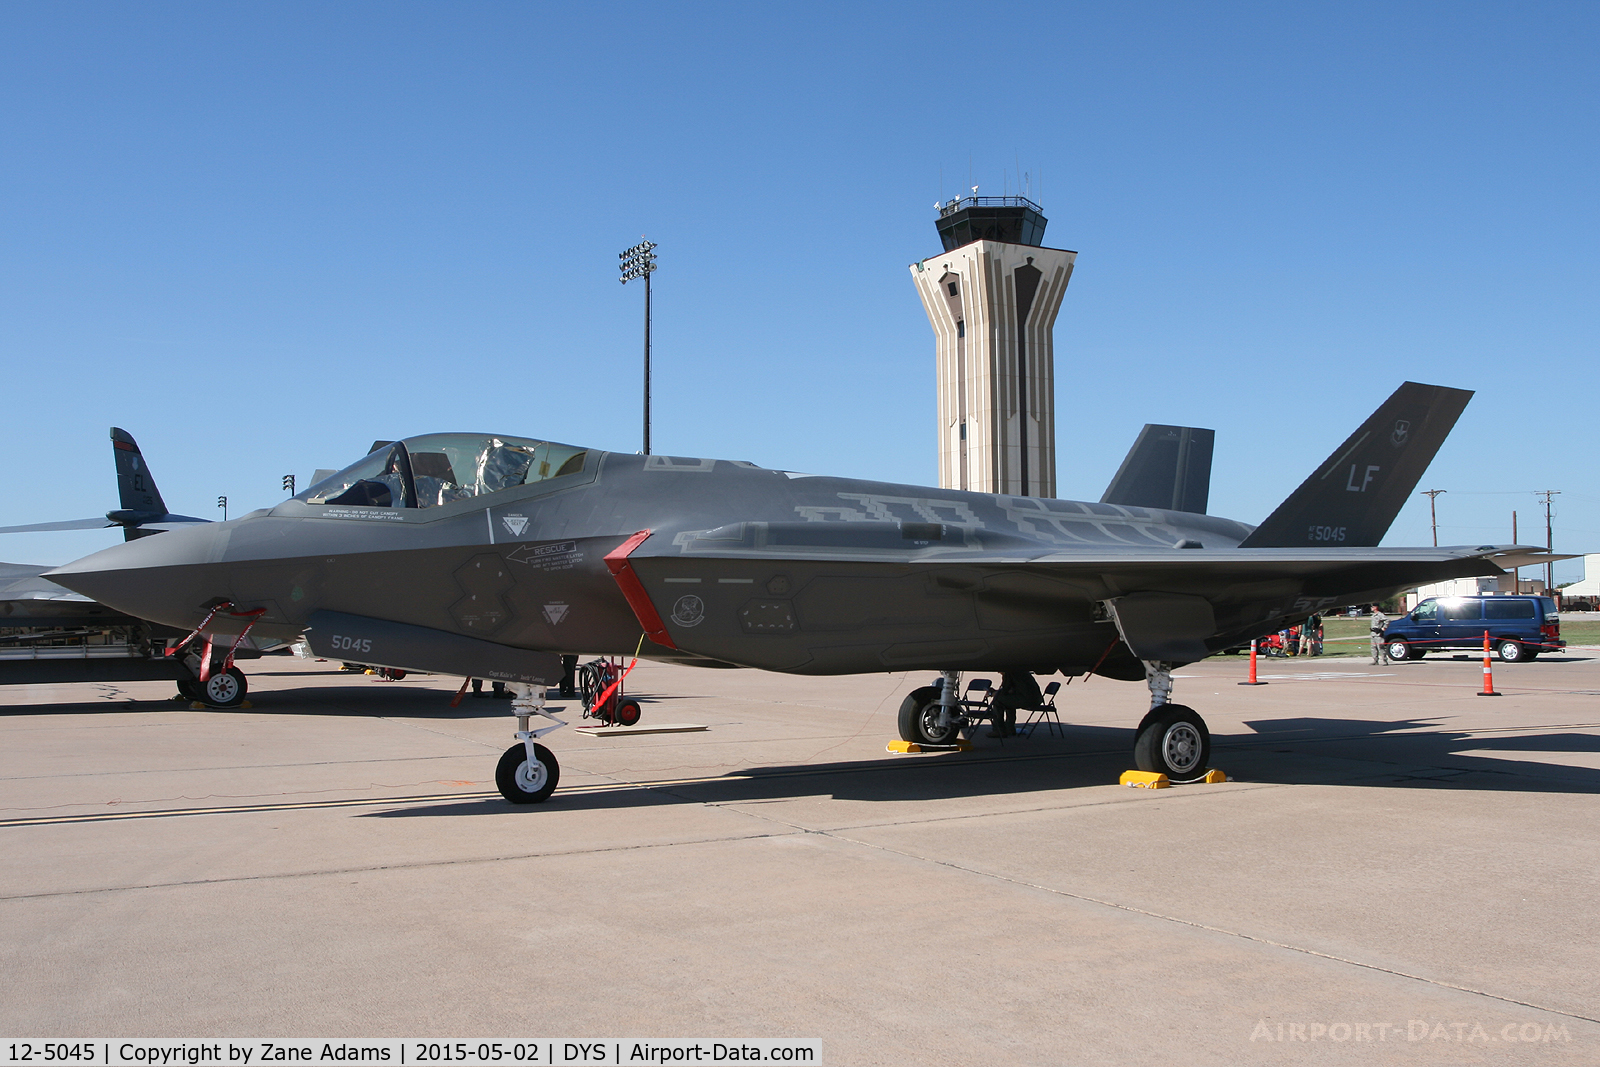 12-5045, 2014 Lockheed Martin F-35A Lightning II C/N AF-56, At the 2014 Big Country Airshow - Dyess AFB, TX